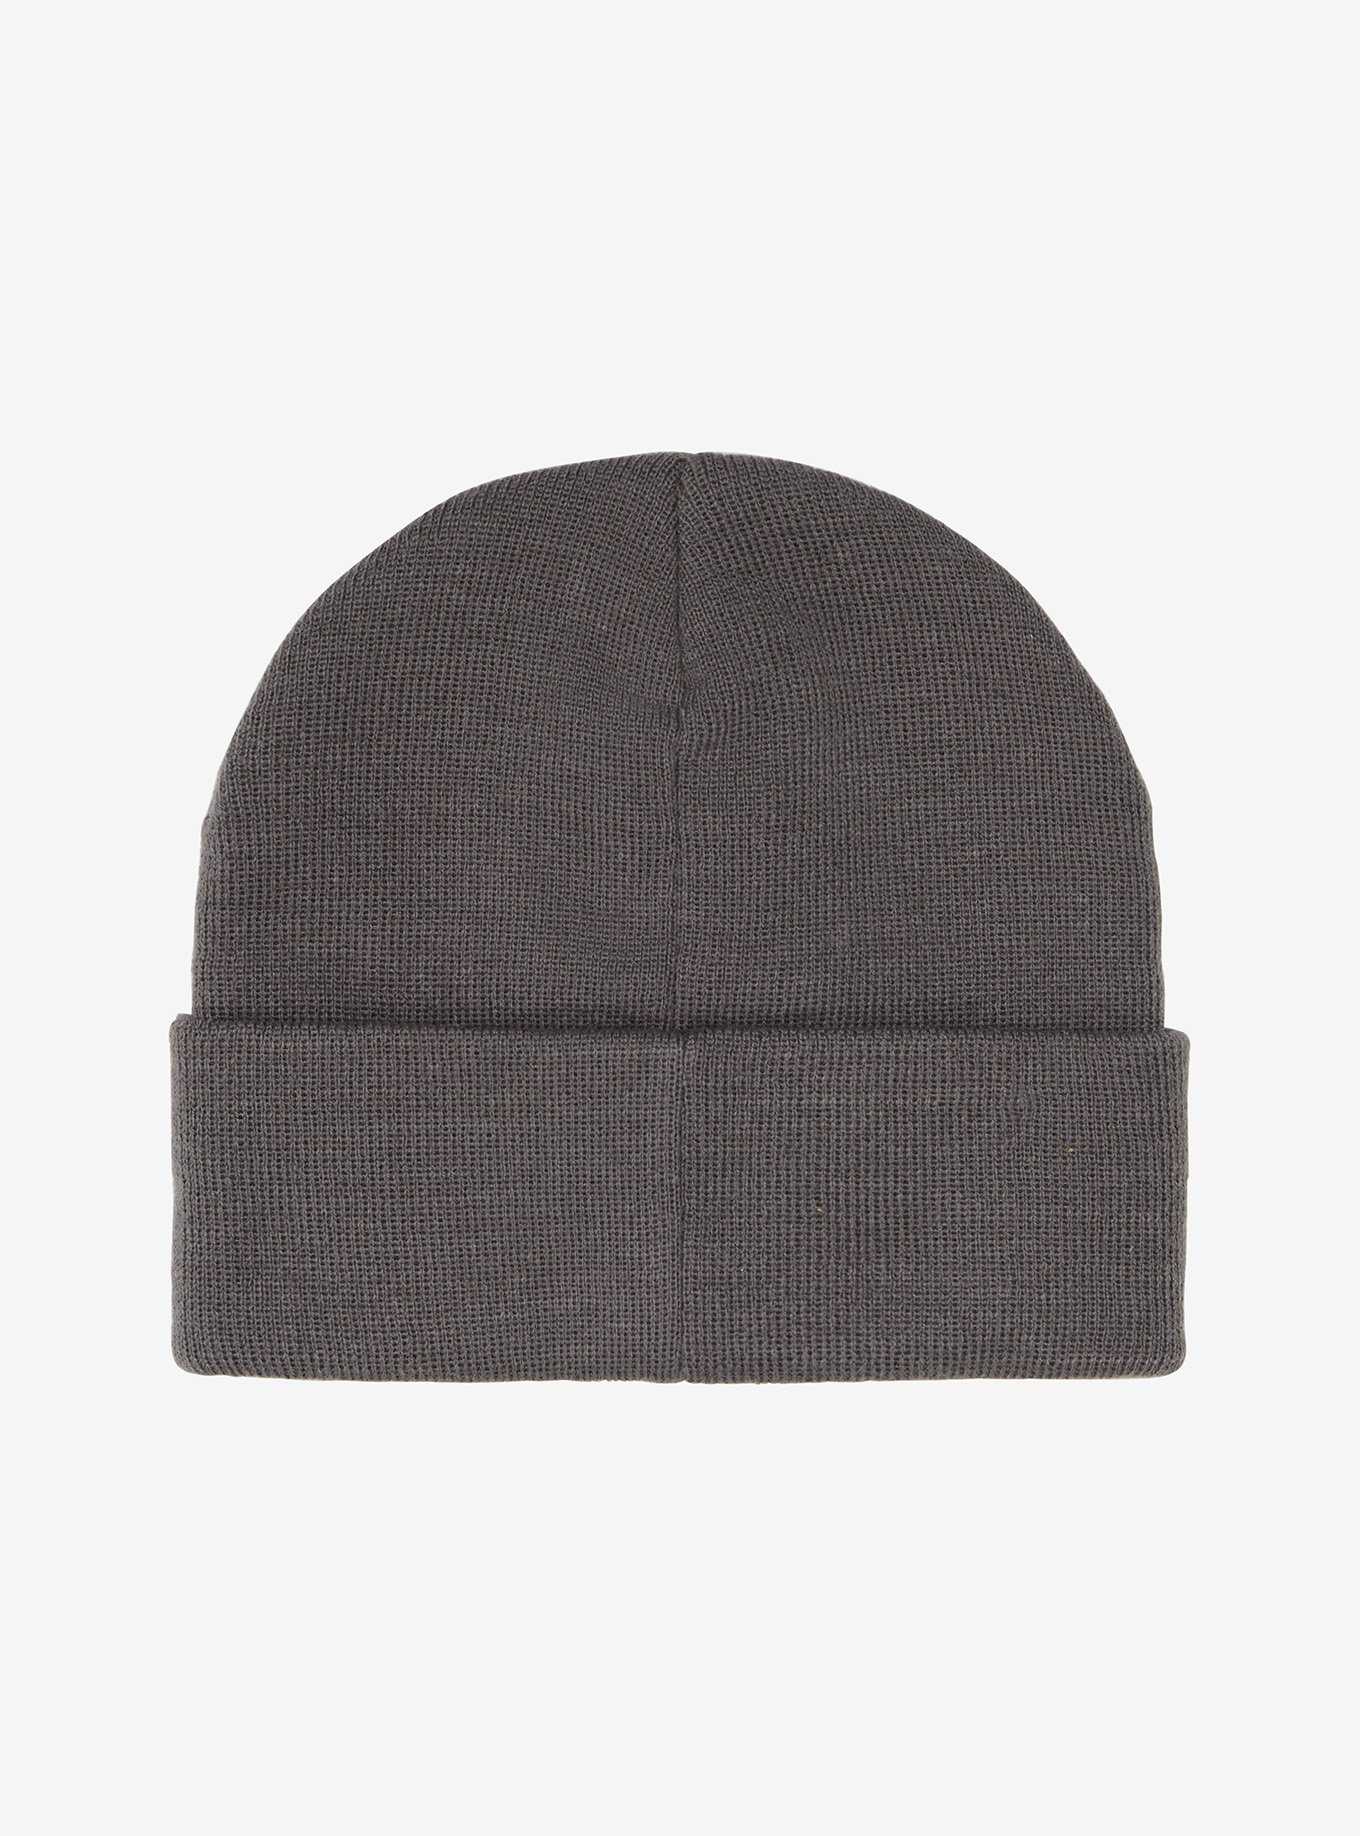 Trendy Beanies: Slouchy, Beanies | Culture & BoxLunch Pop Cool